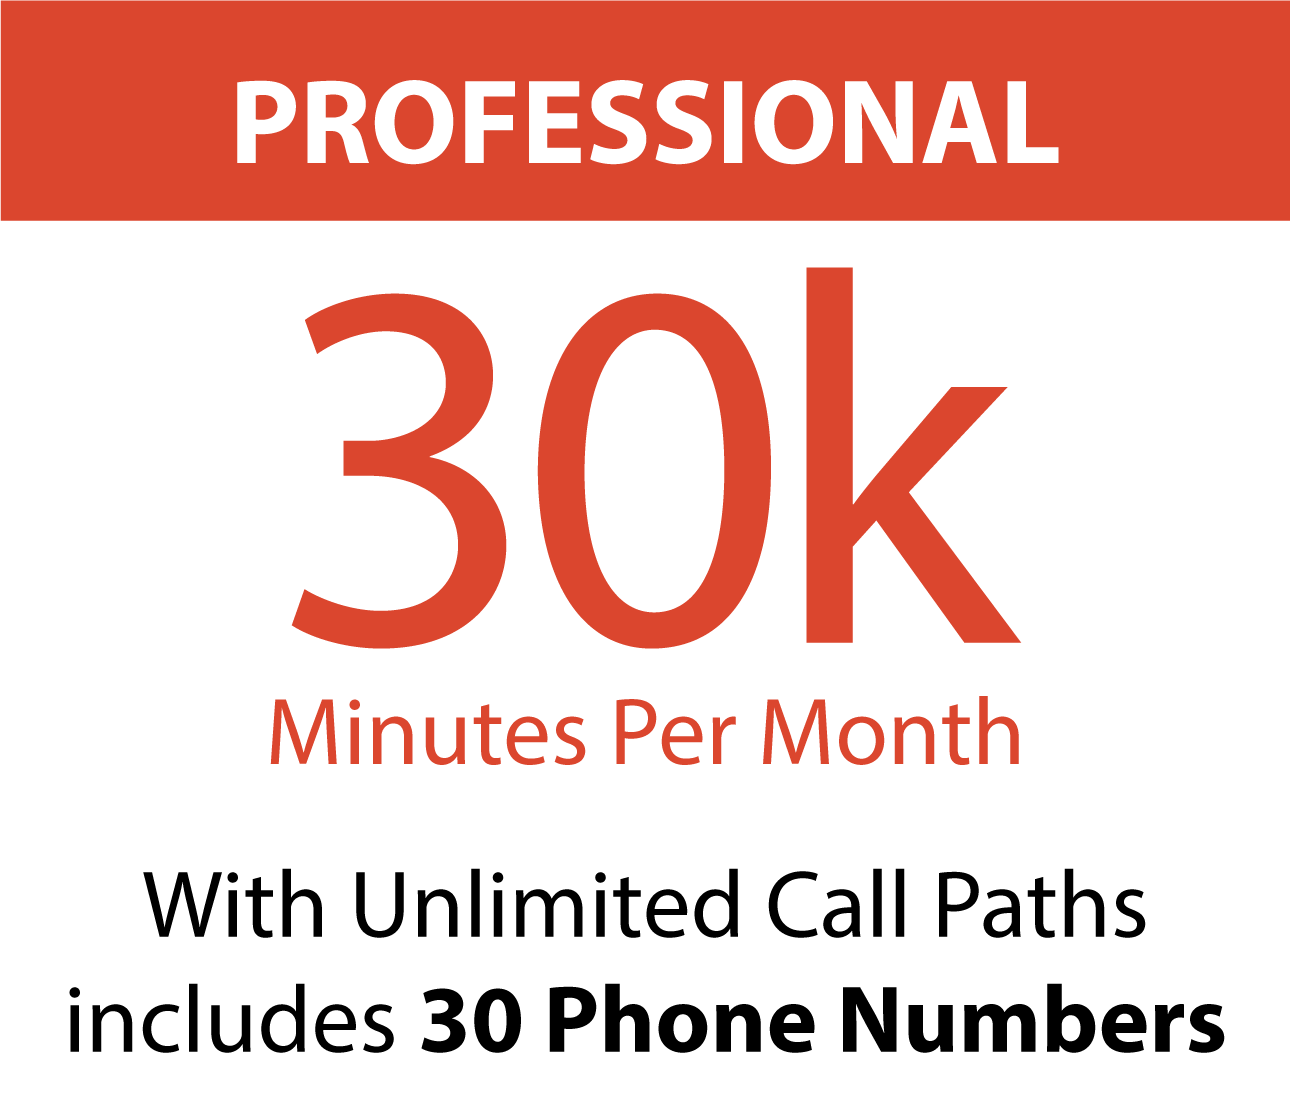 30K minutes per month – With unlimited call paths includes thirty phone numbers